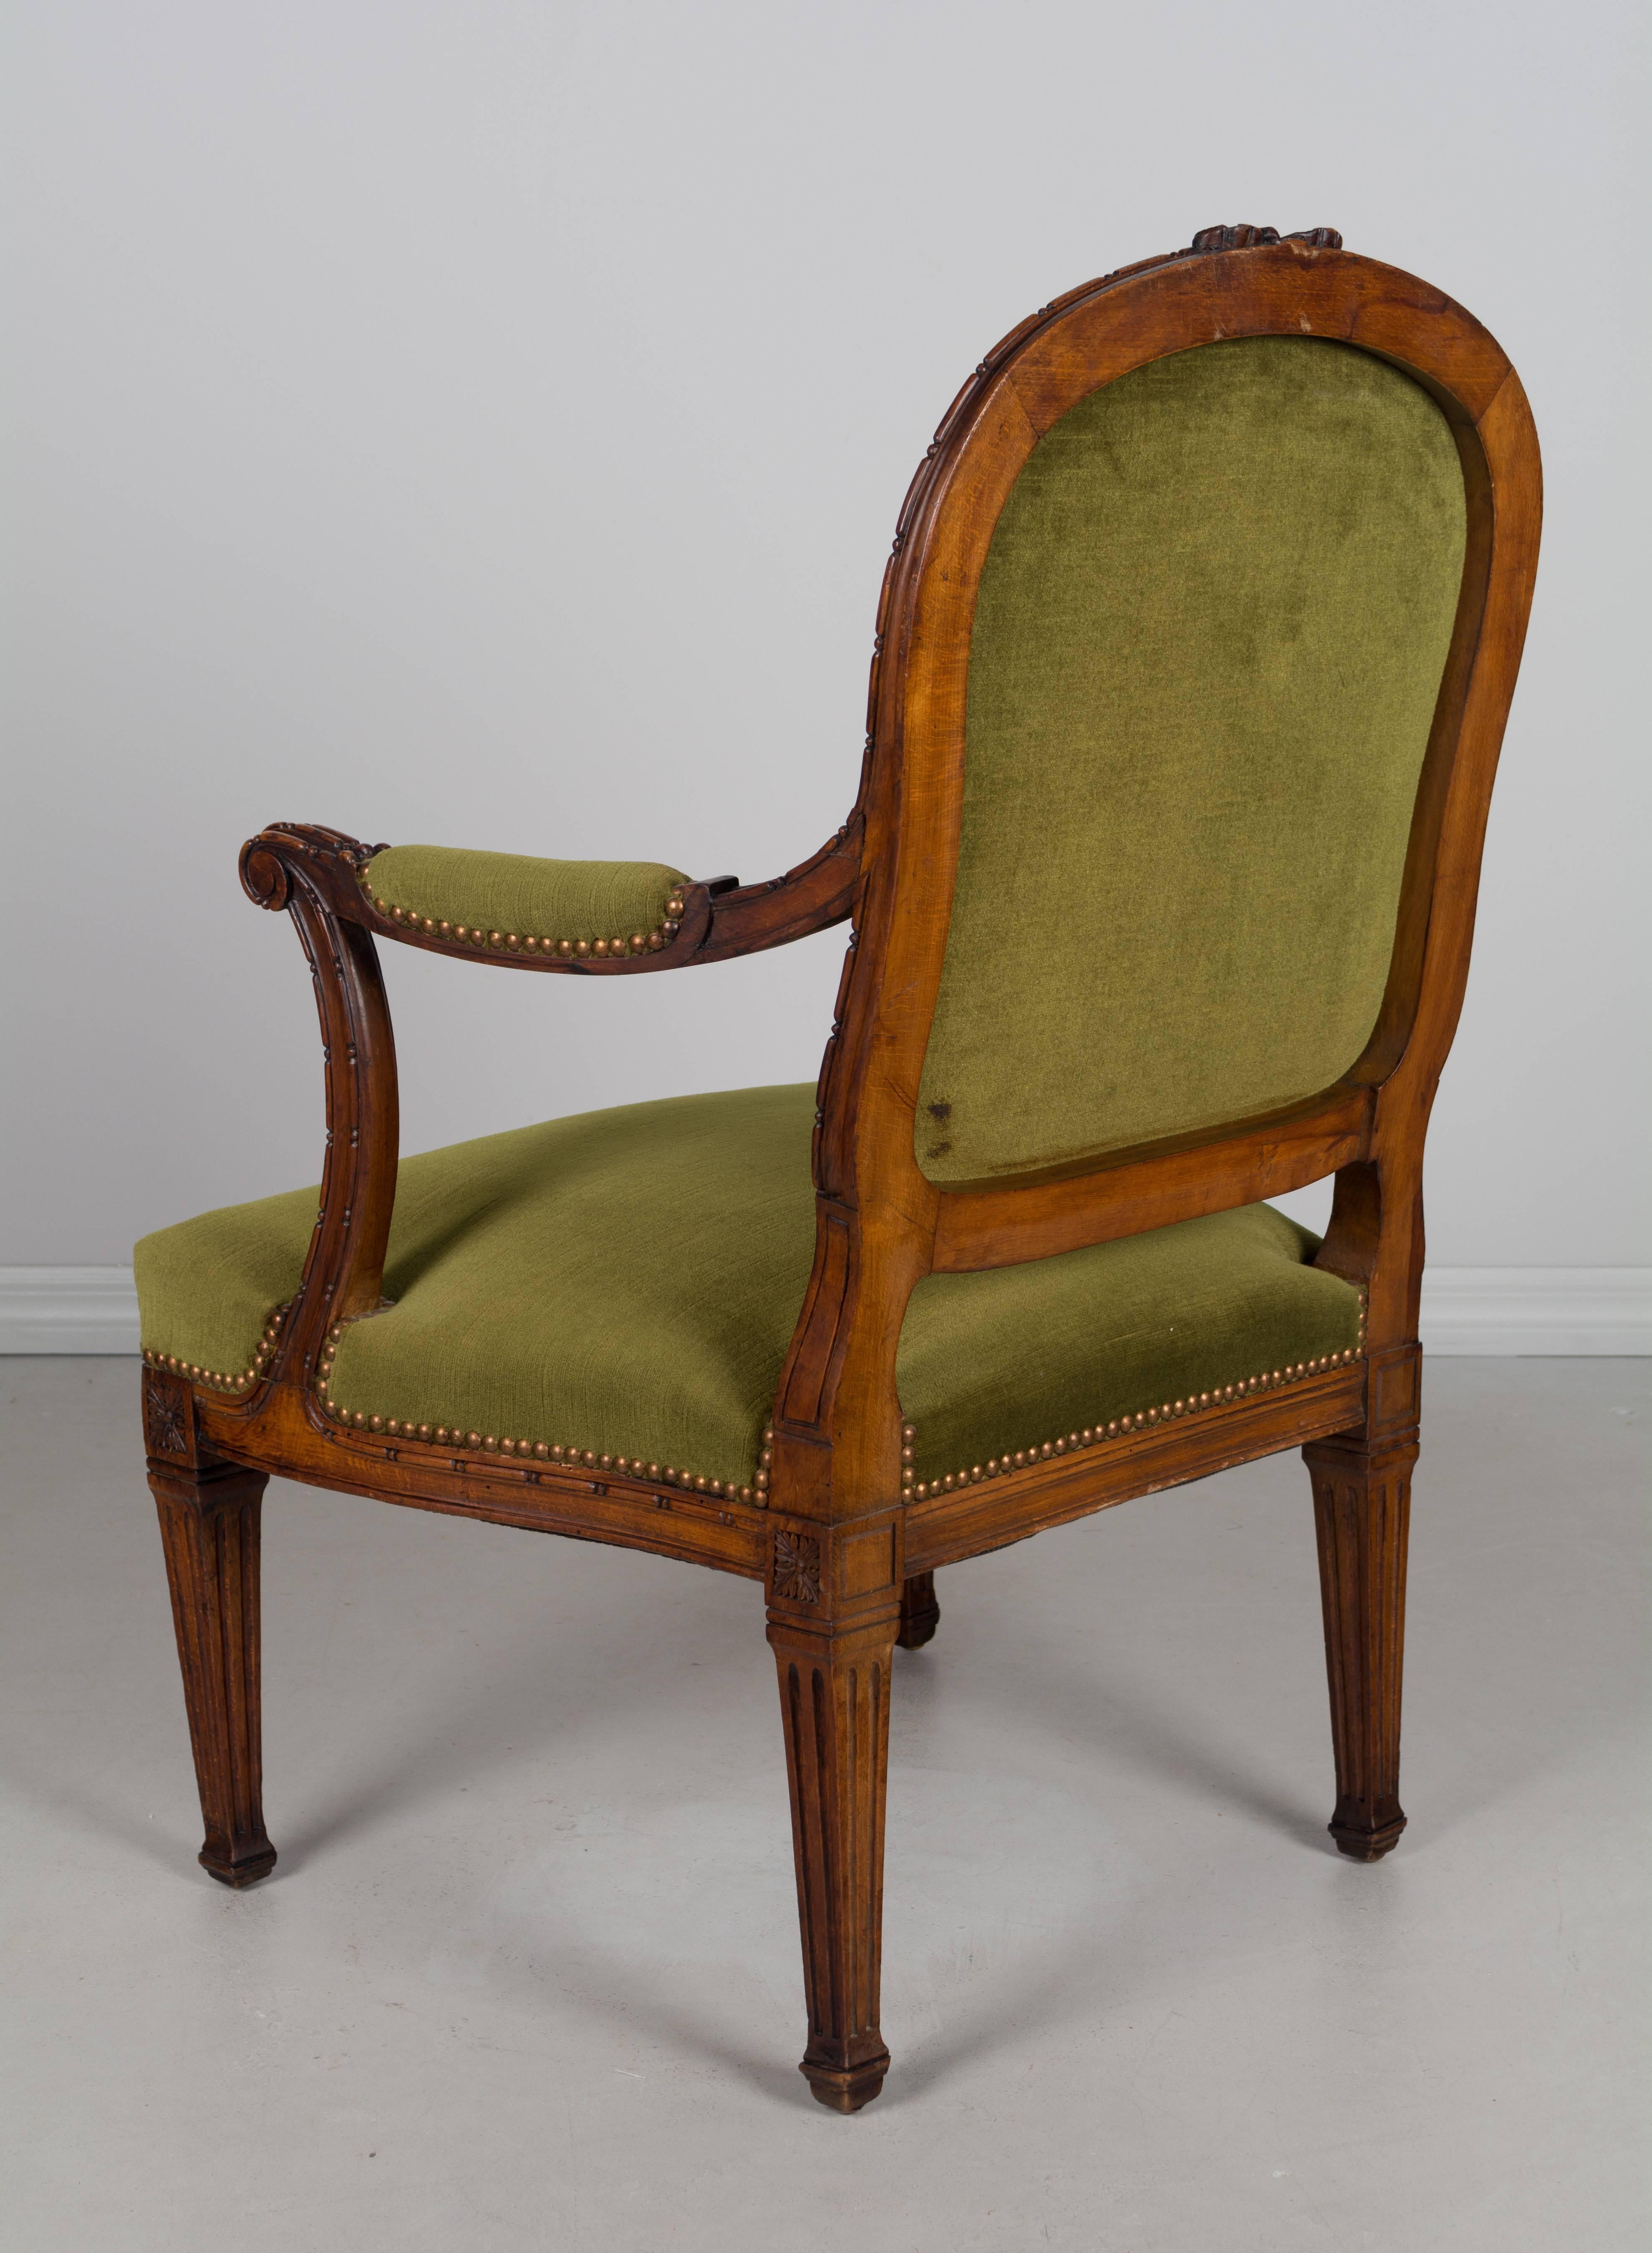 Carved 19th Century Louis XVI Style Fauteuil